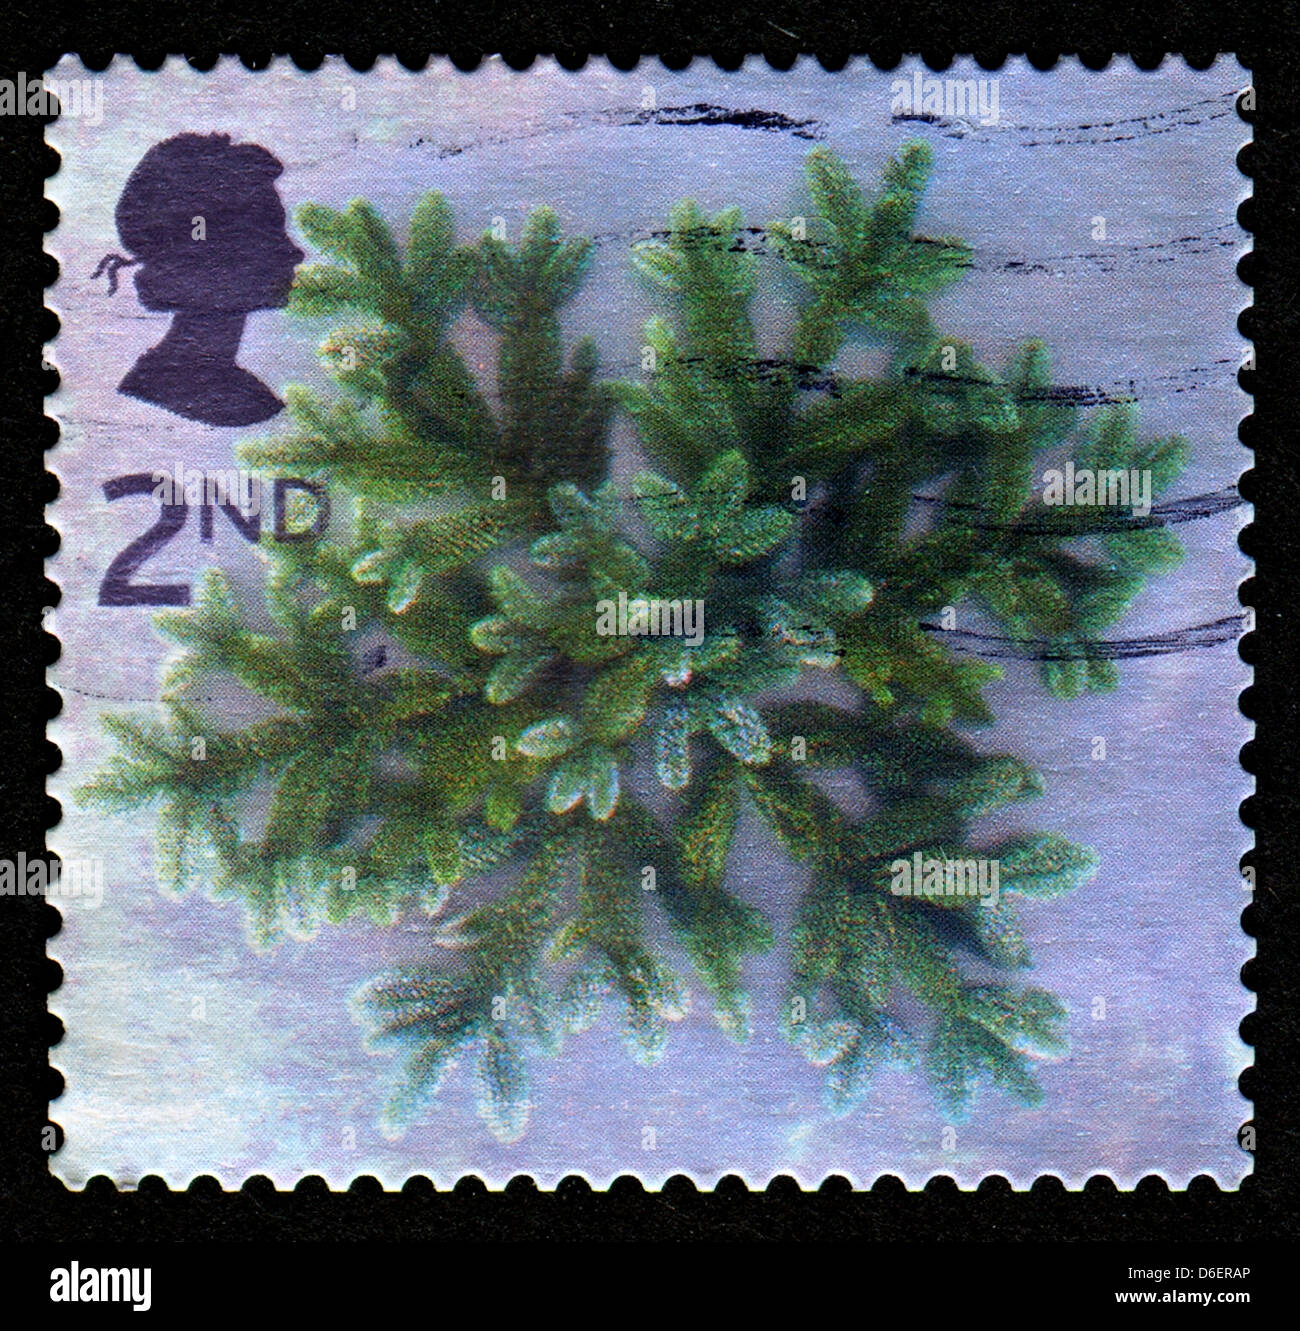 UK - CIRCA 2002: A stamp printed in UK shows image of The Blue Spruce Star, circa 2002.  Stock Photo